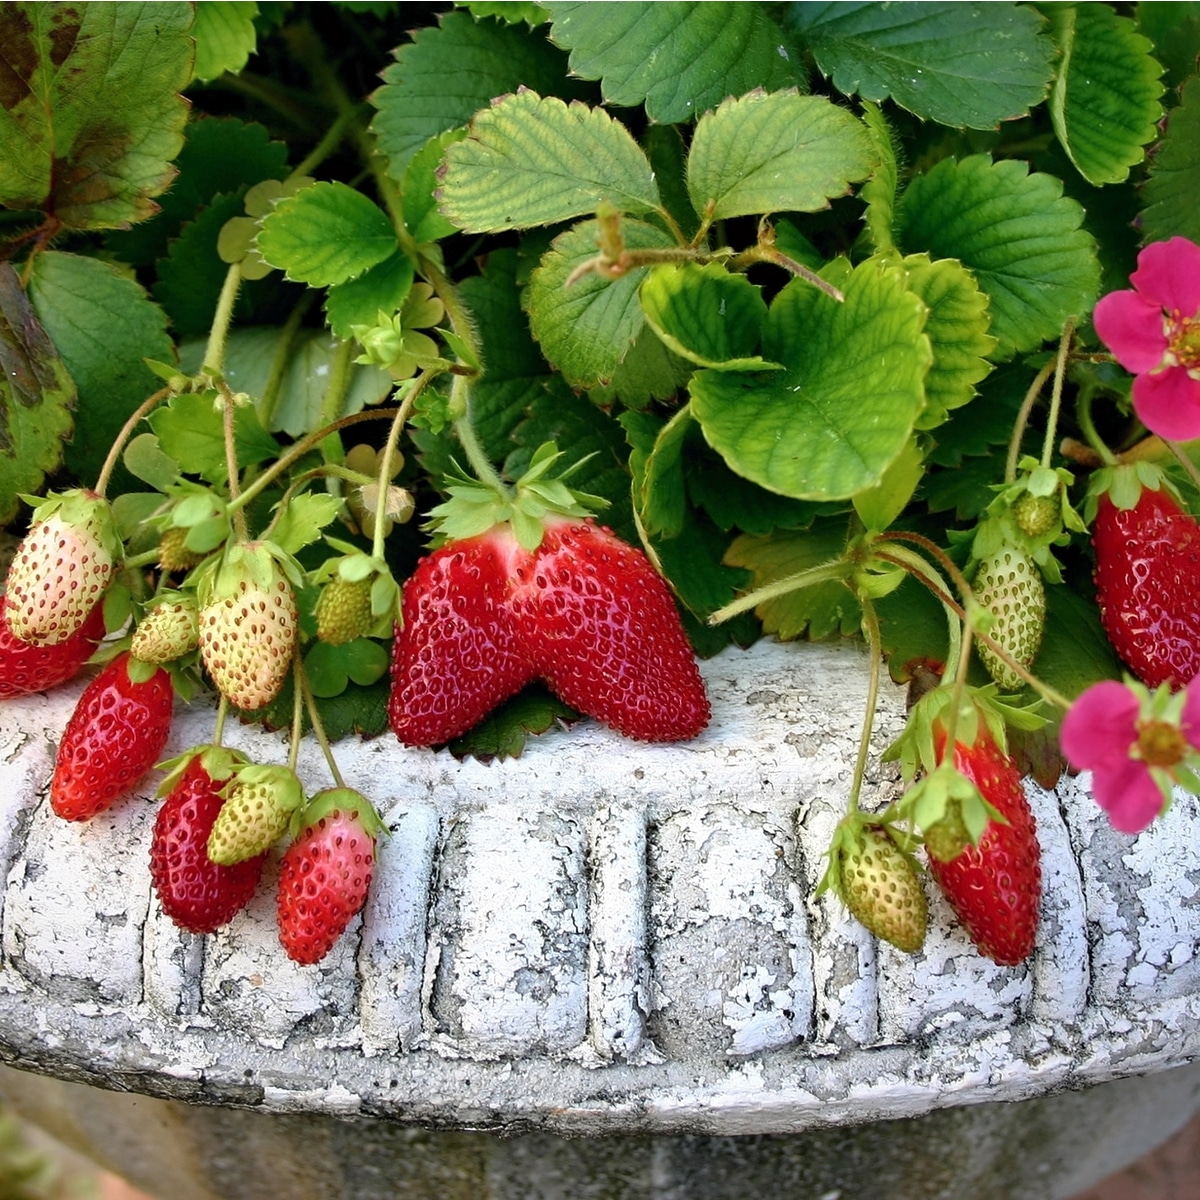 Strawberry plant in whitish pot with ripe and unripe fruits